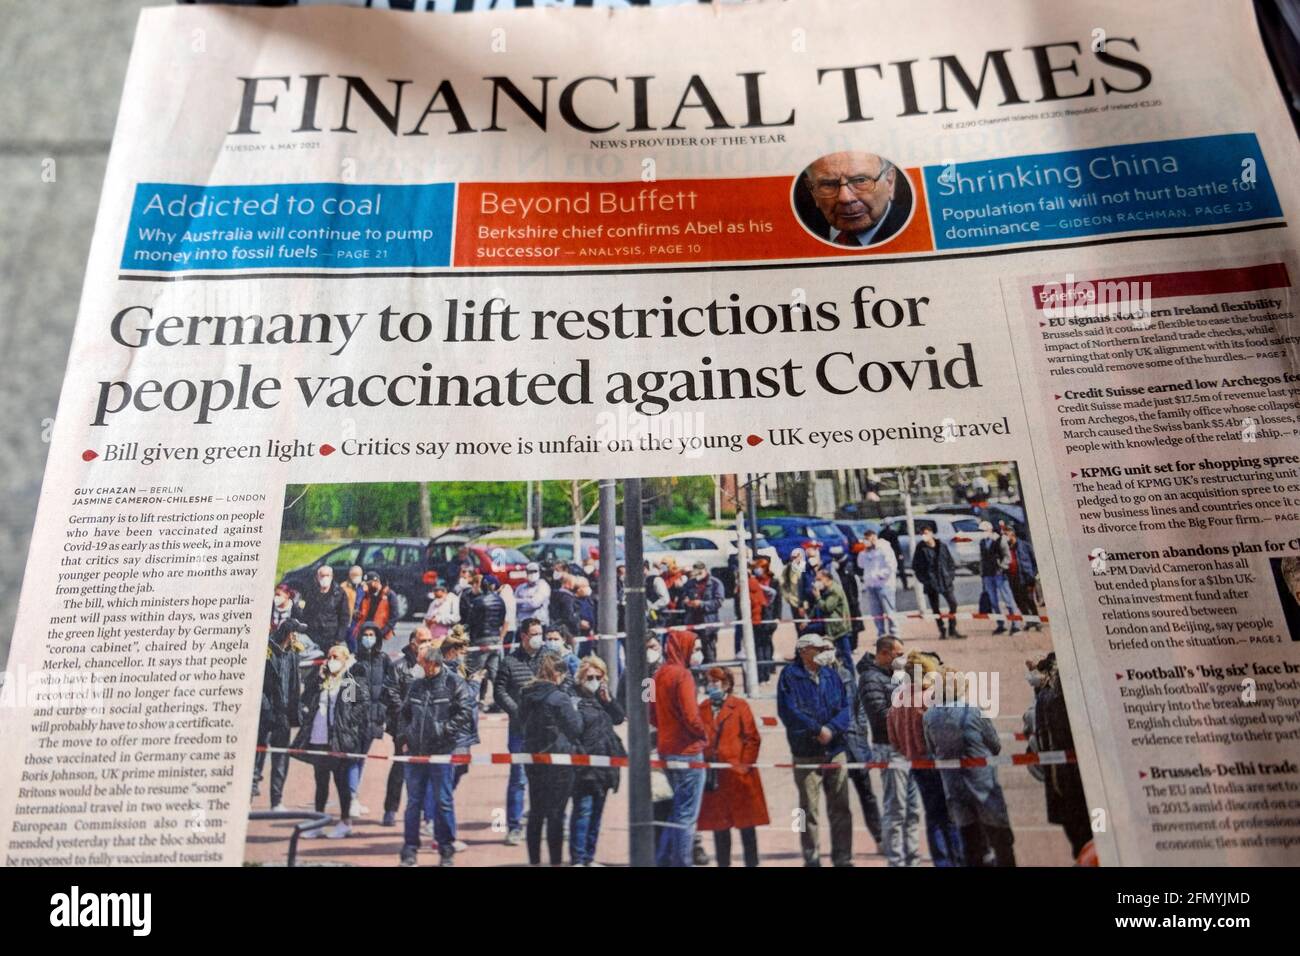 'Germany to lift restrictions for people vaccinated against Covid' Financial Times front page Covid vaccinations newspaper headline 2021 Europe EU UK Stock Photo